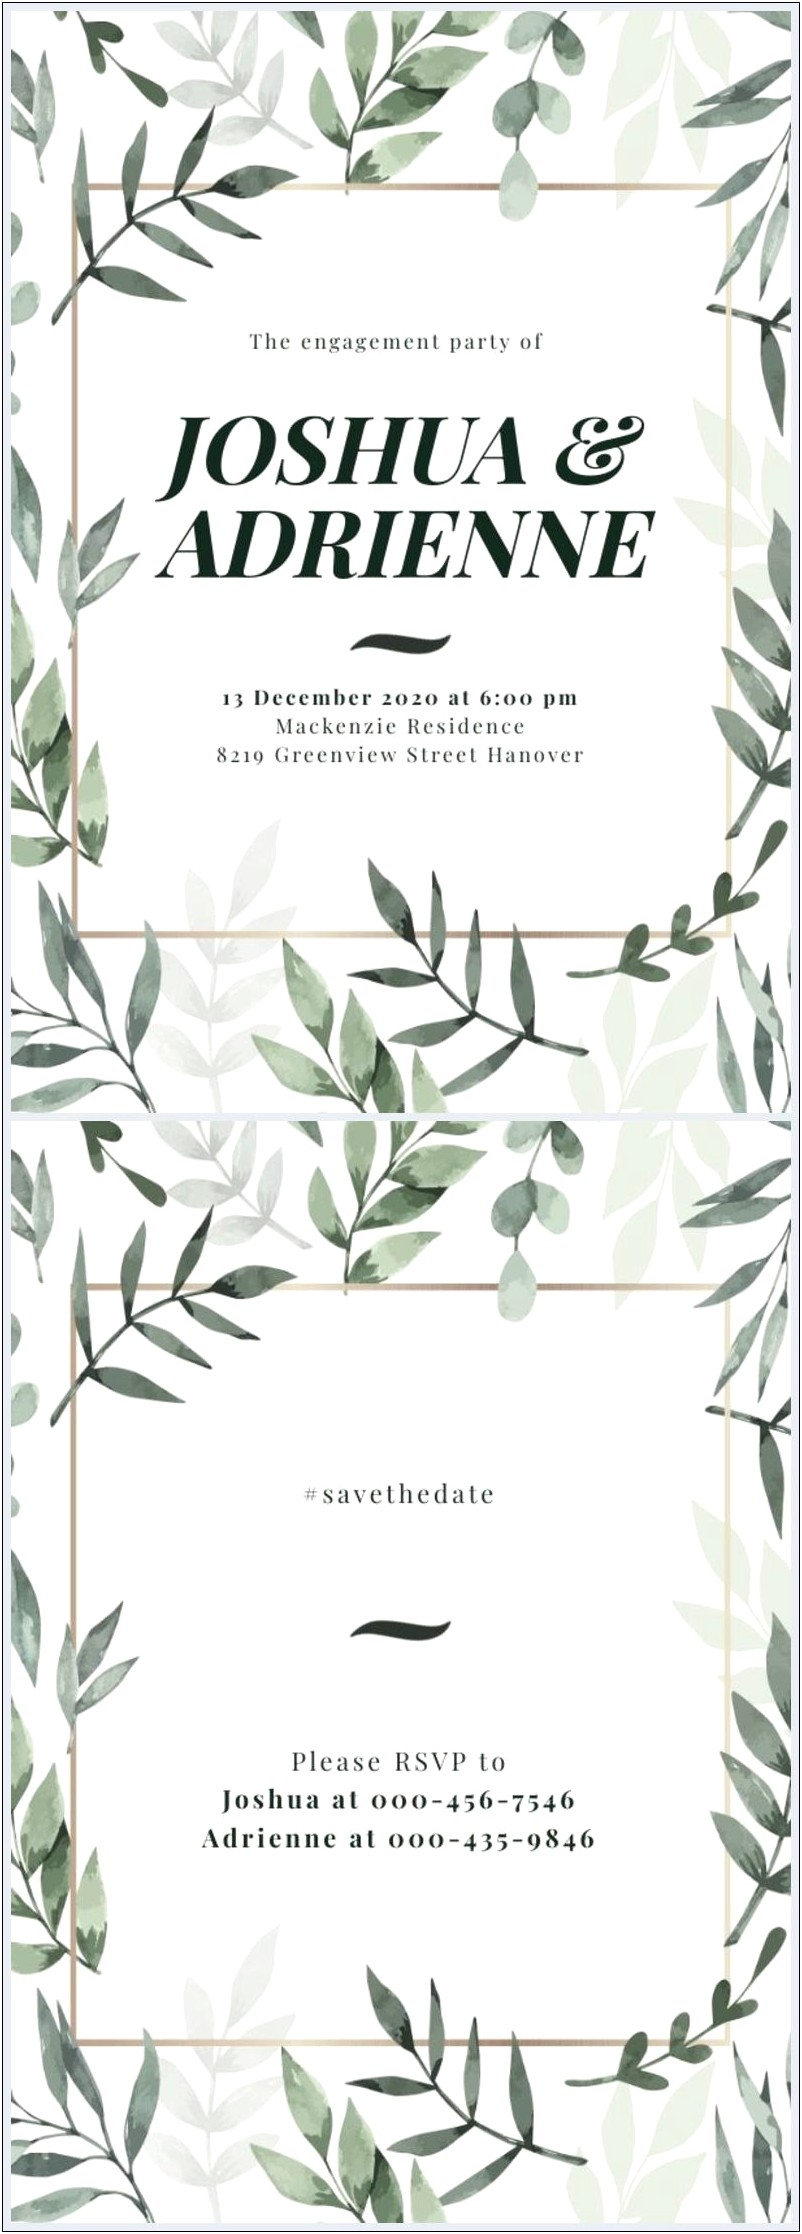 Free Invitation Card Templates For Engagement